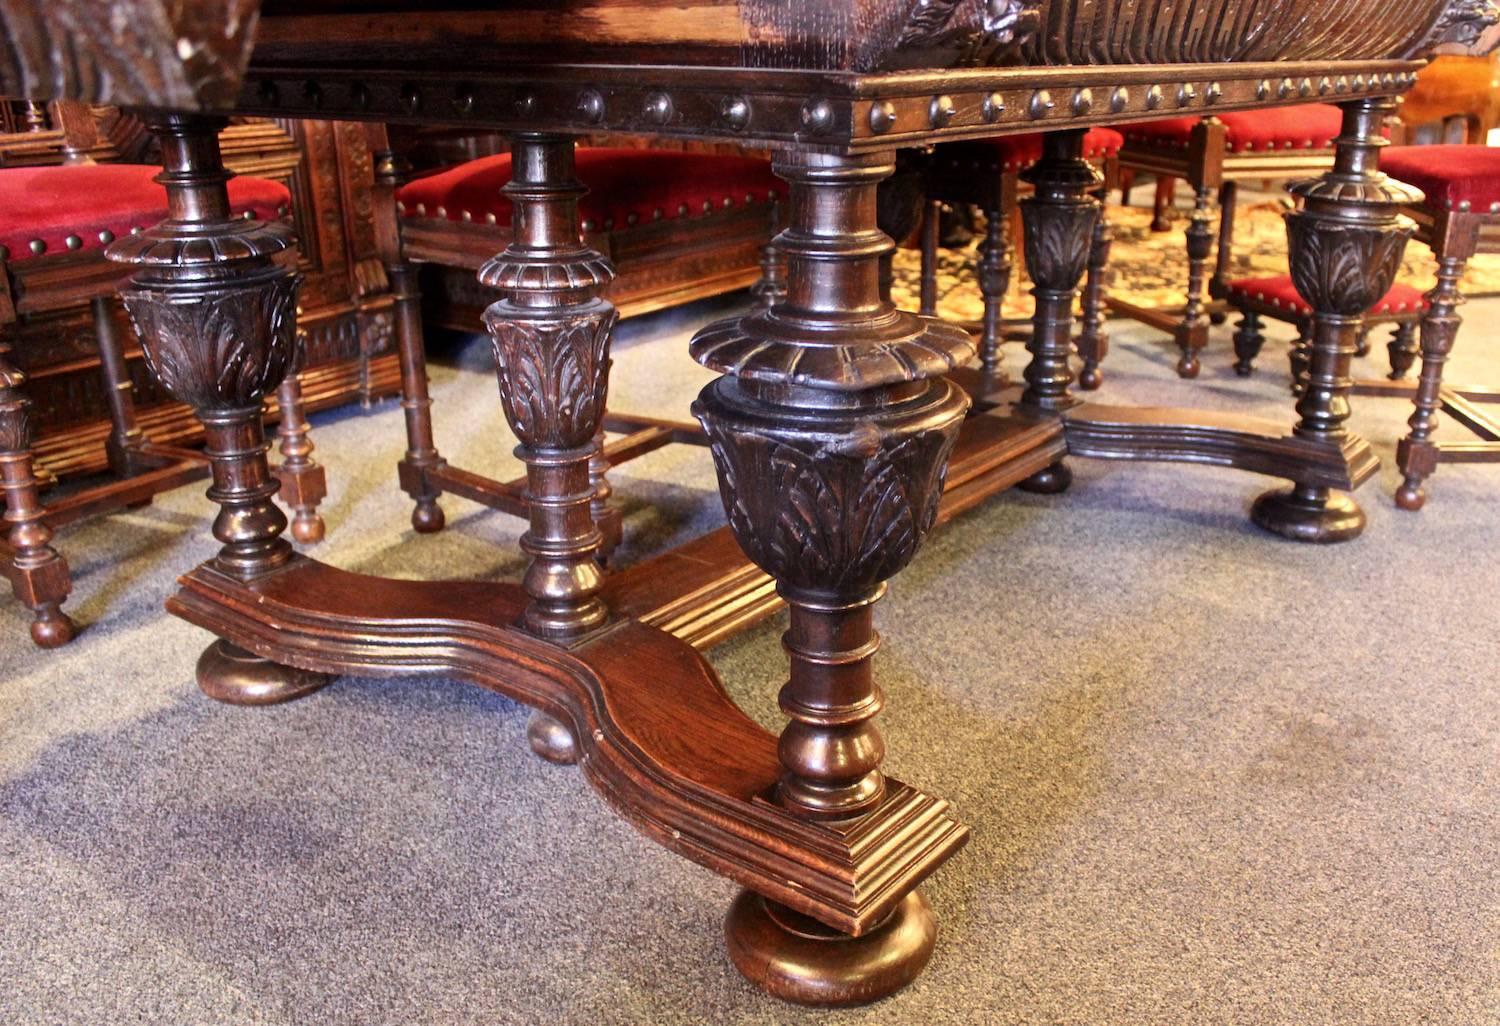 This ornately carved Renaissance style dining set includes an extendable table with two leaves, six standard chairs, two-arm chairs, two foot stools and two buffets. The chairs feature top metal handles and raised studs. The storage on the two